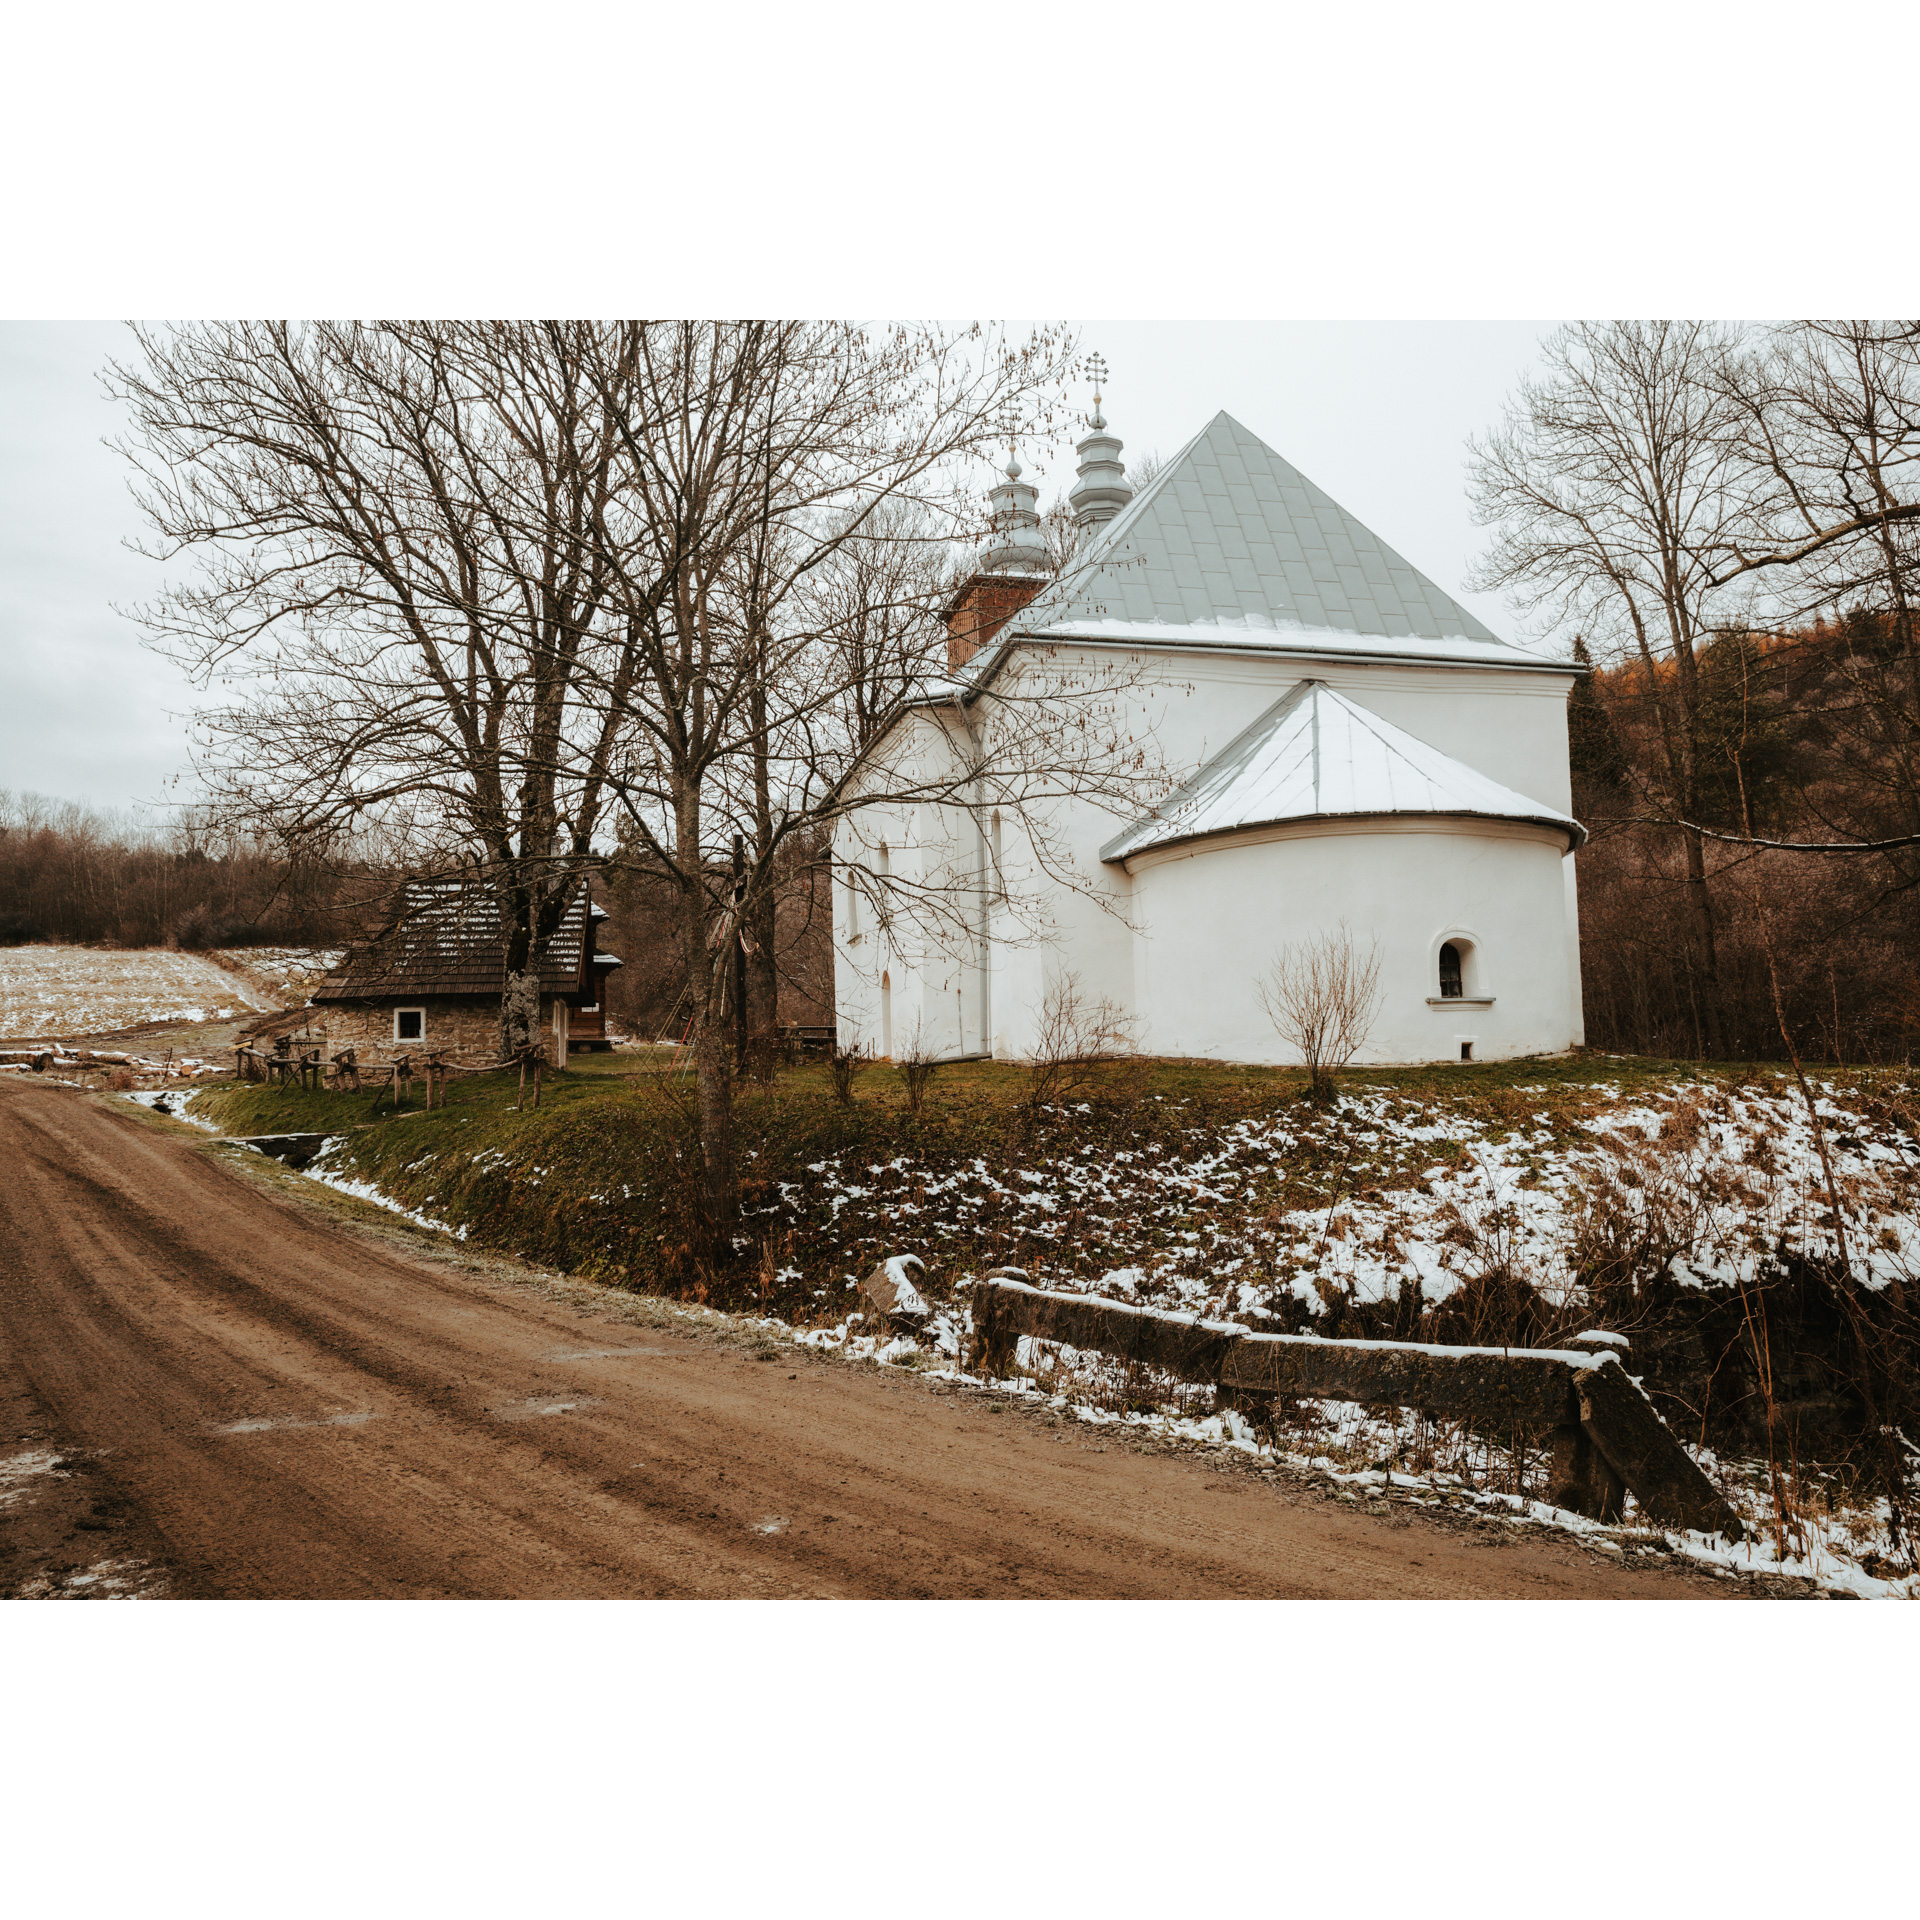 A white church building by a dirt road and an old house with a wooden roof